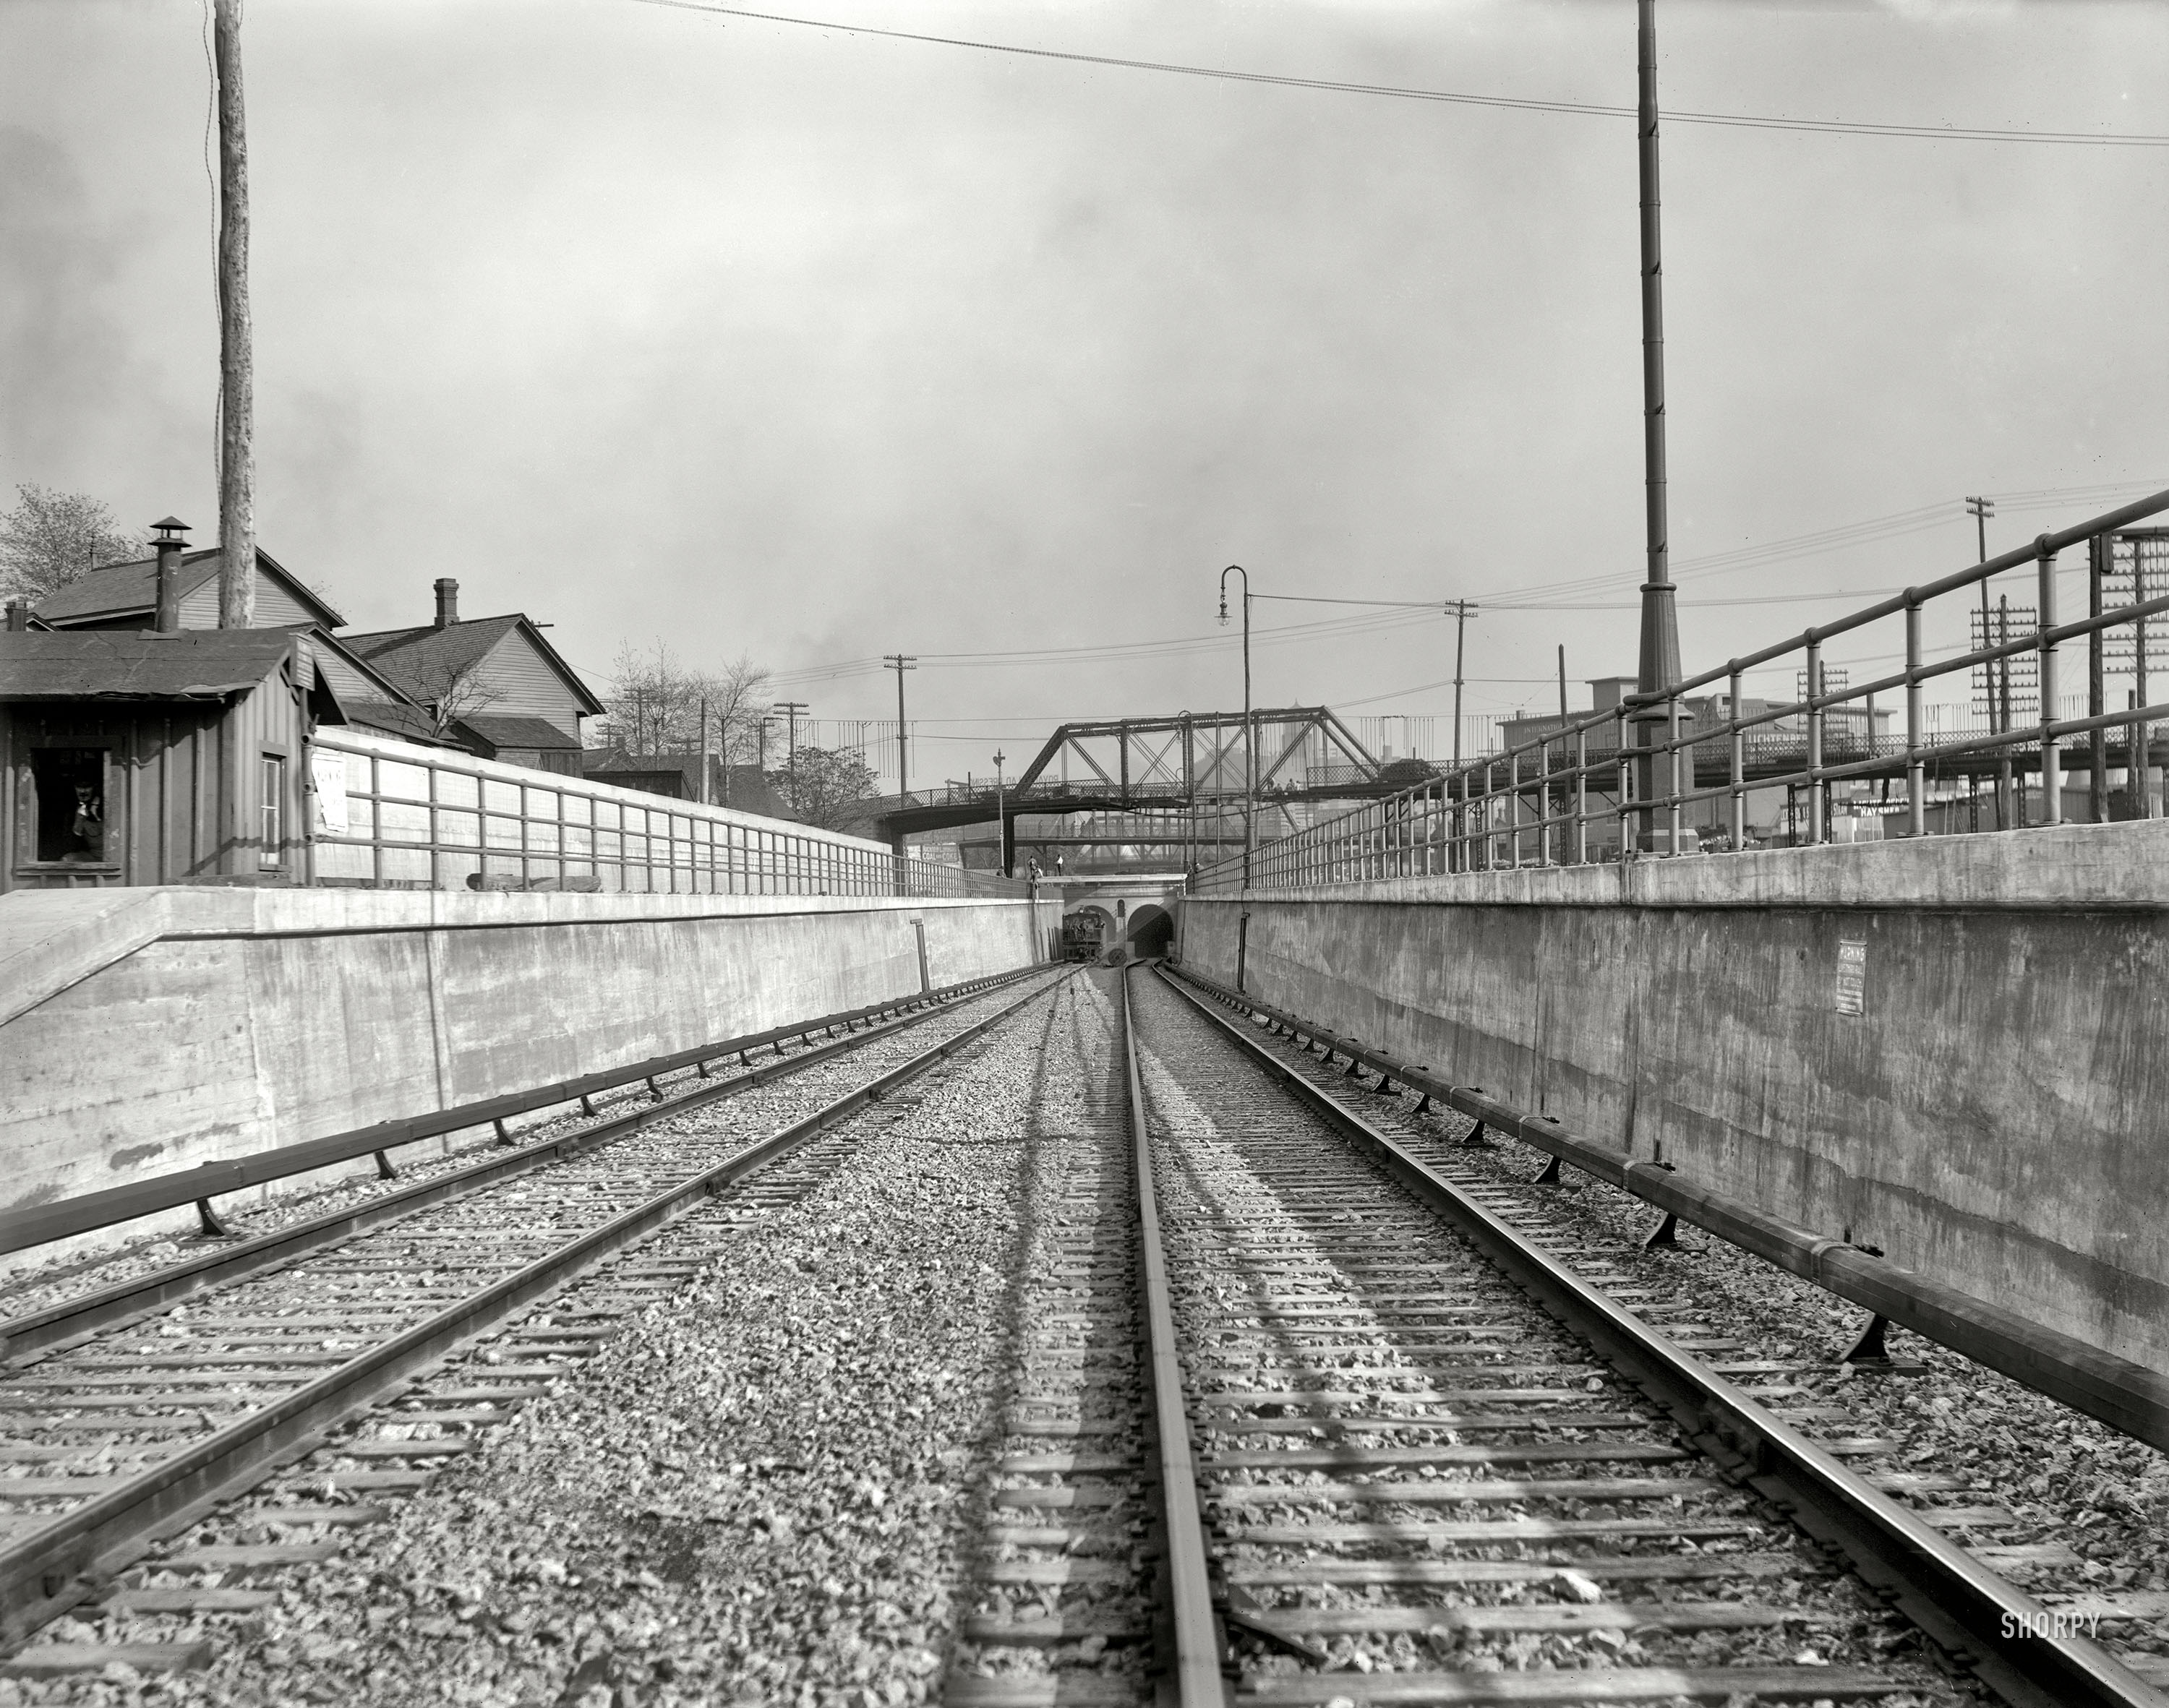 Detroit circa 1910. "Michigan Central Railroad tunnel." Another view of the electrified tracks going under the Detroit River. View full size.